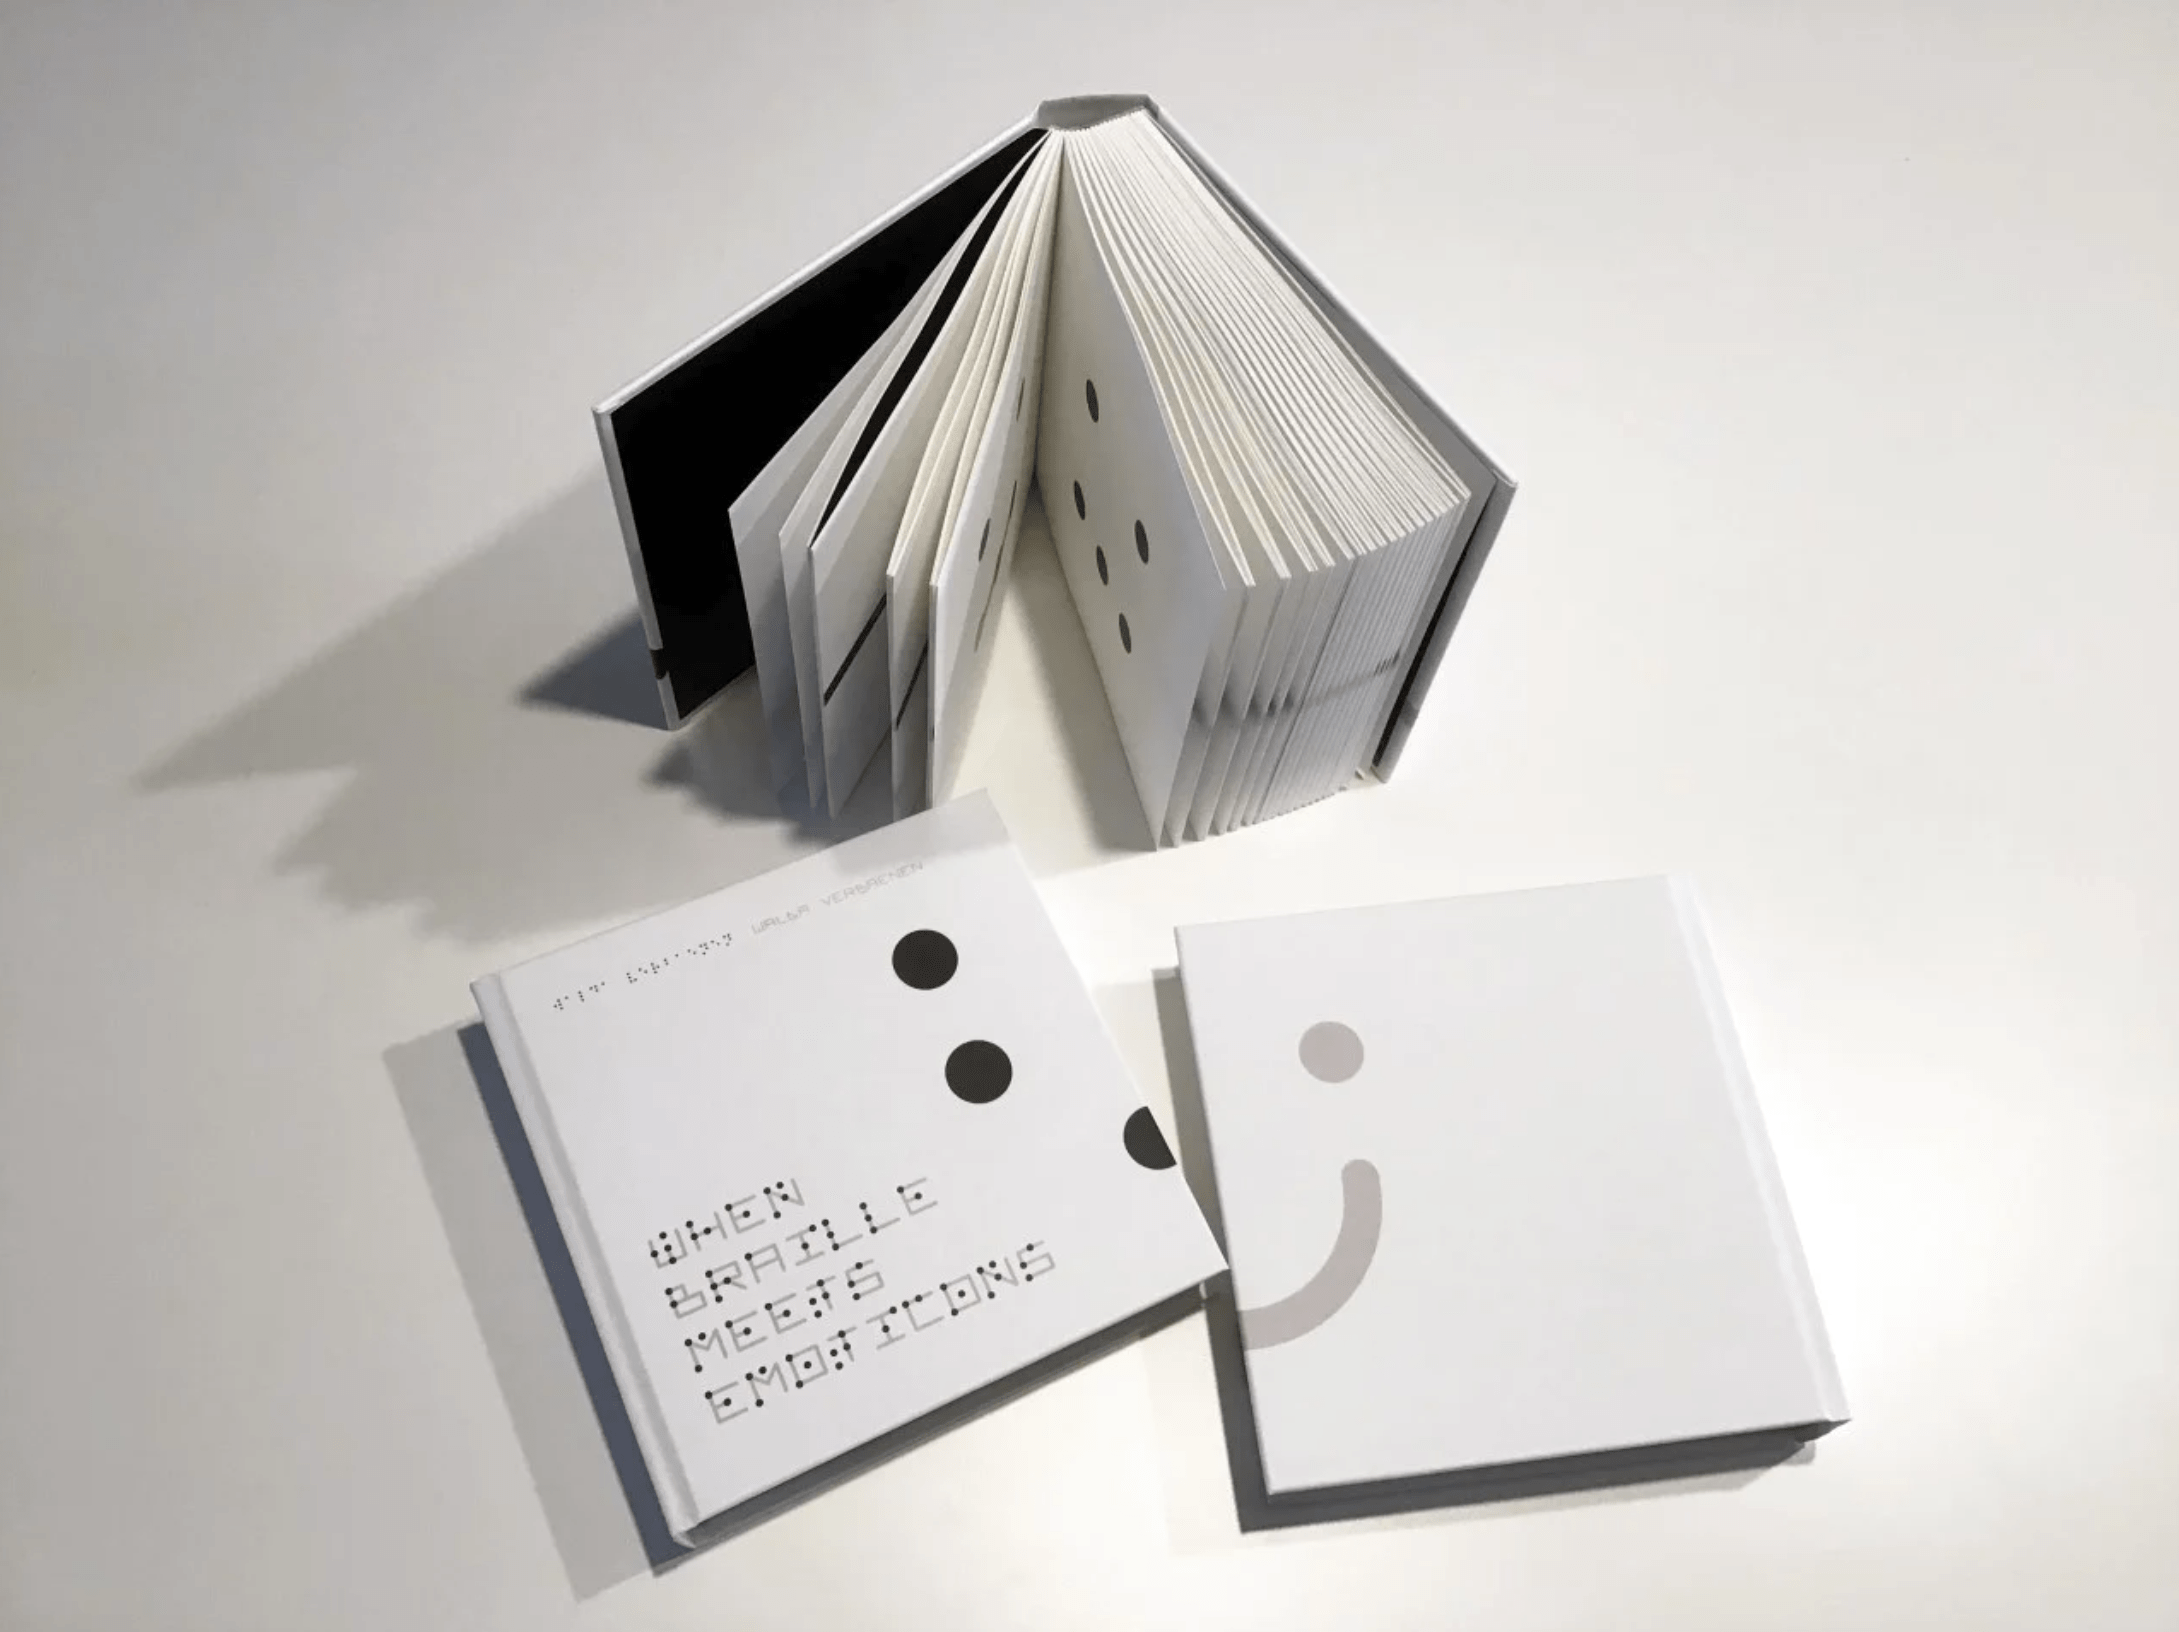 Braille Meets Emoticons